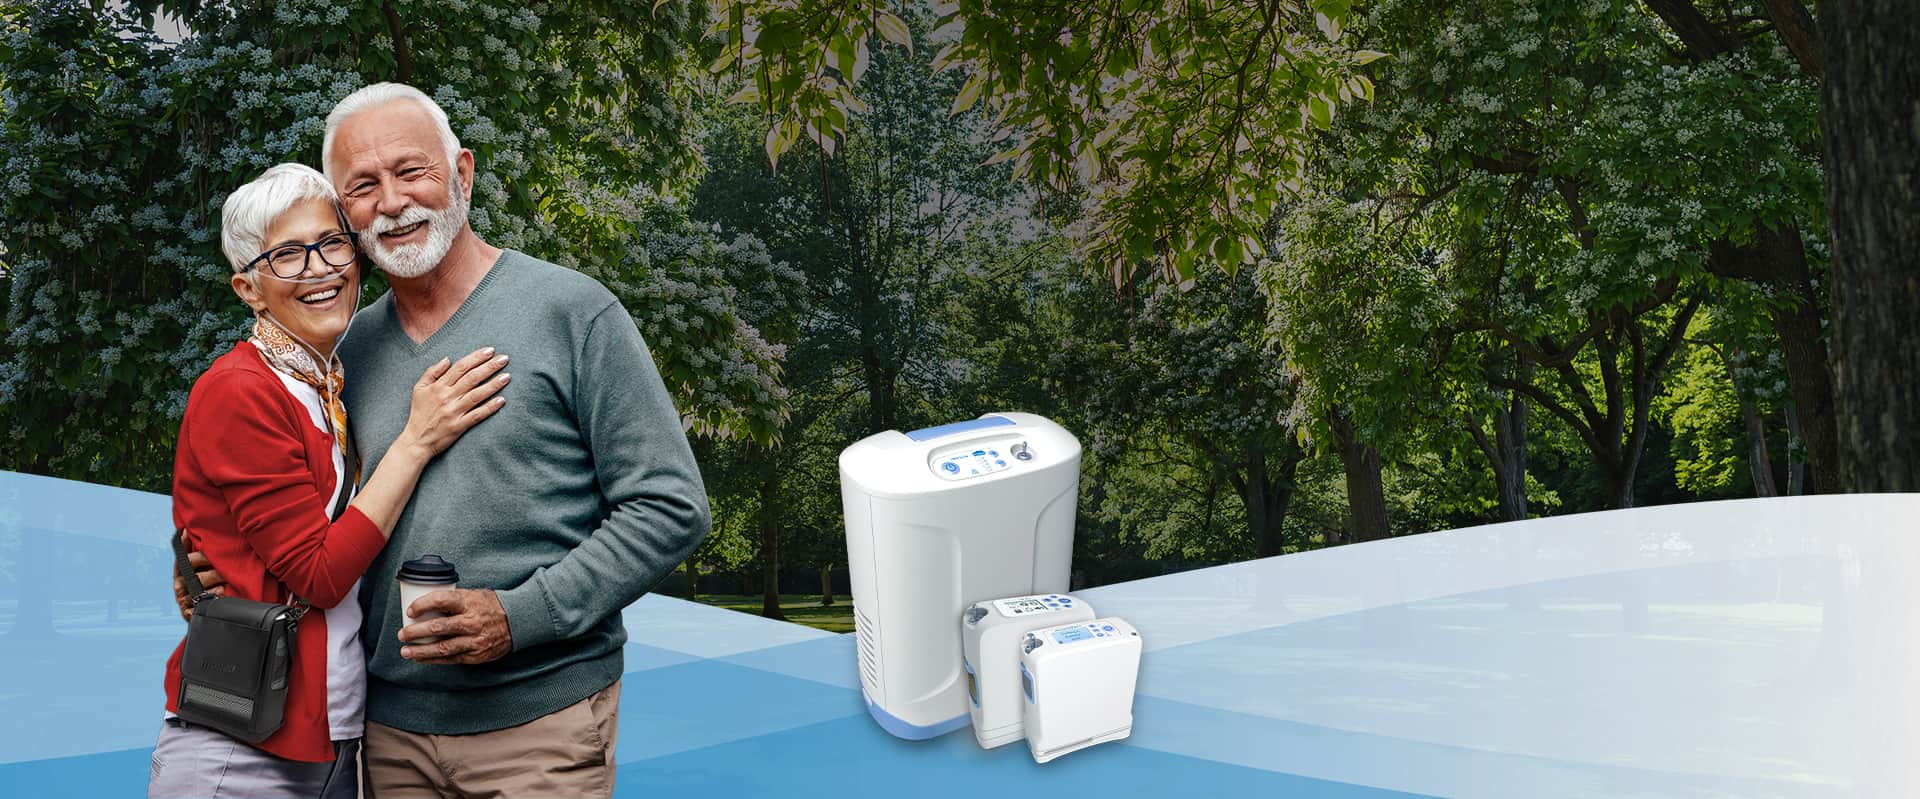 Couple posing with Inogen Portable Oxygen Concentrator